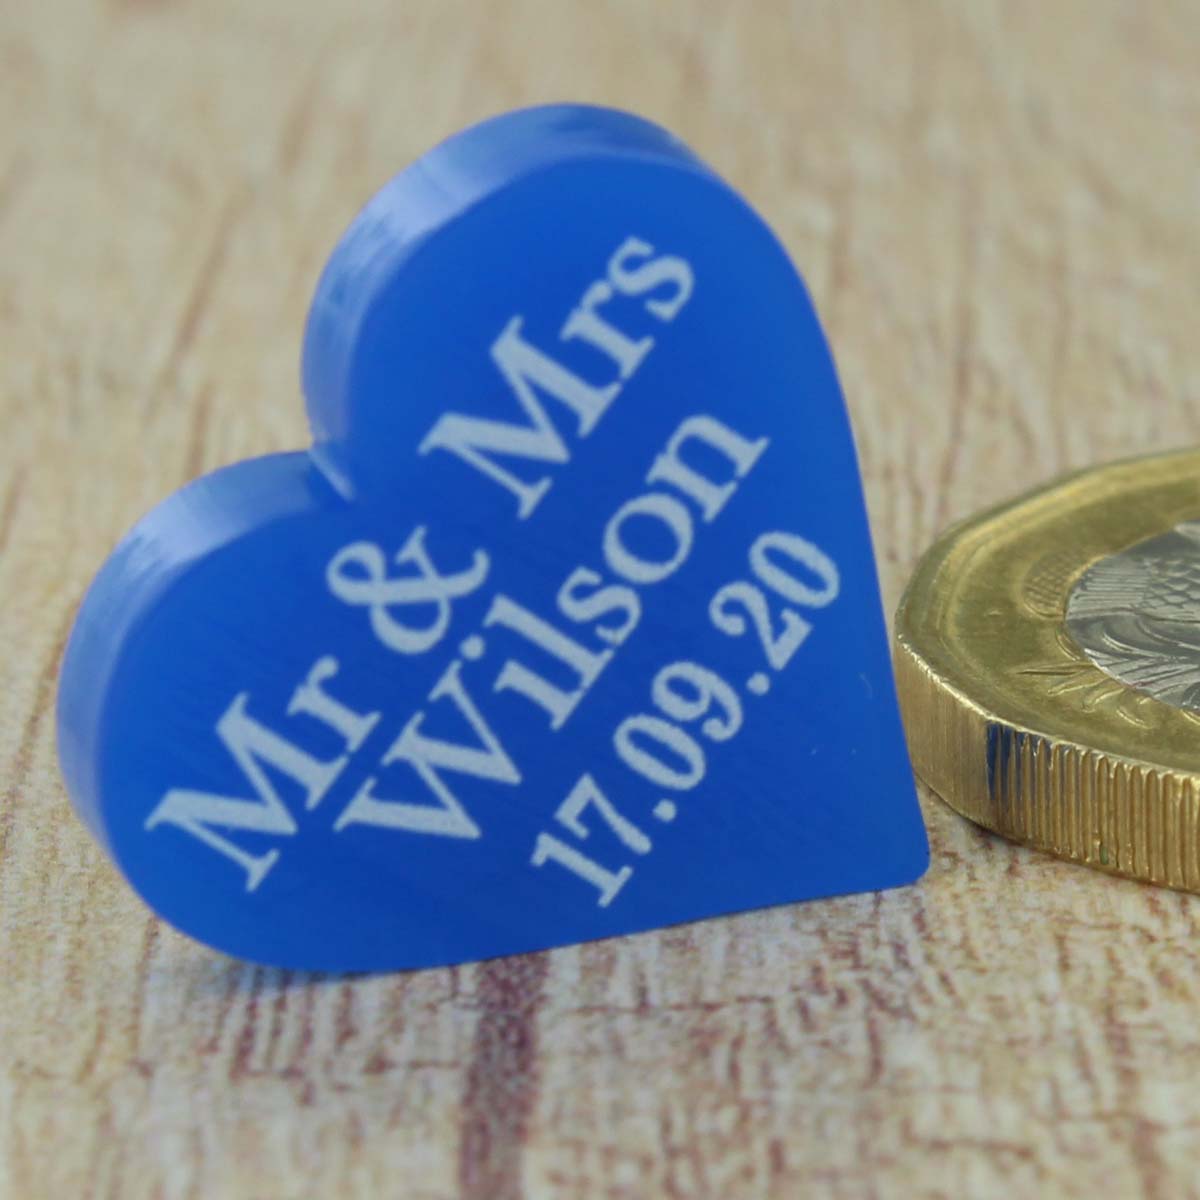 Personalised Wedding Favours - Glossy Dark Blue Acrylic Love Hearts